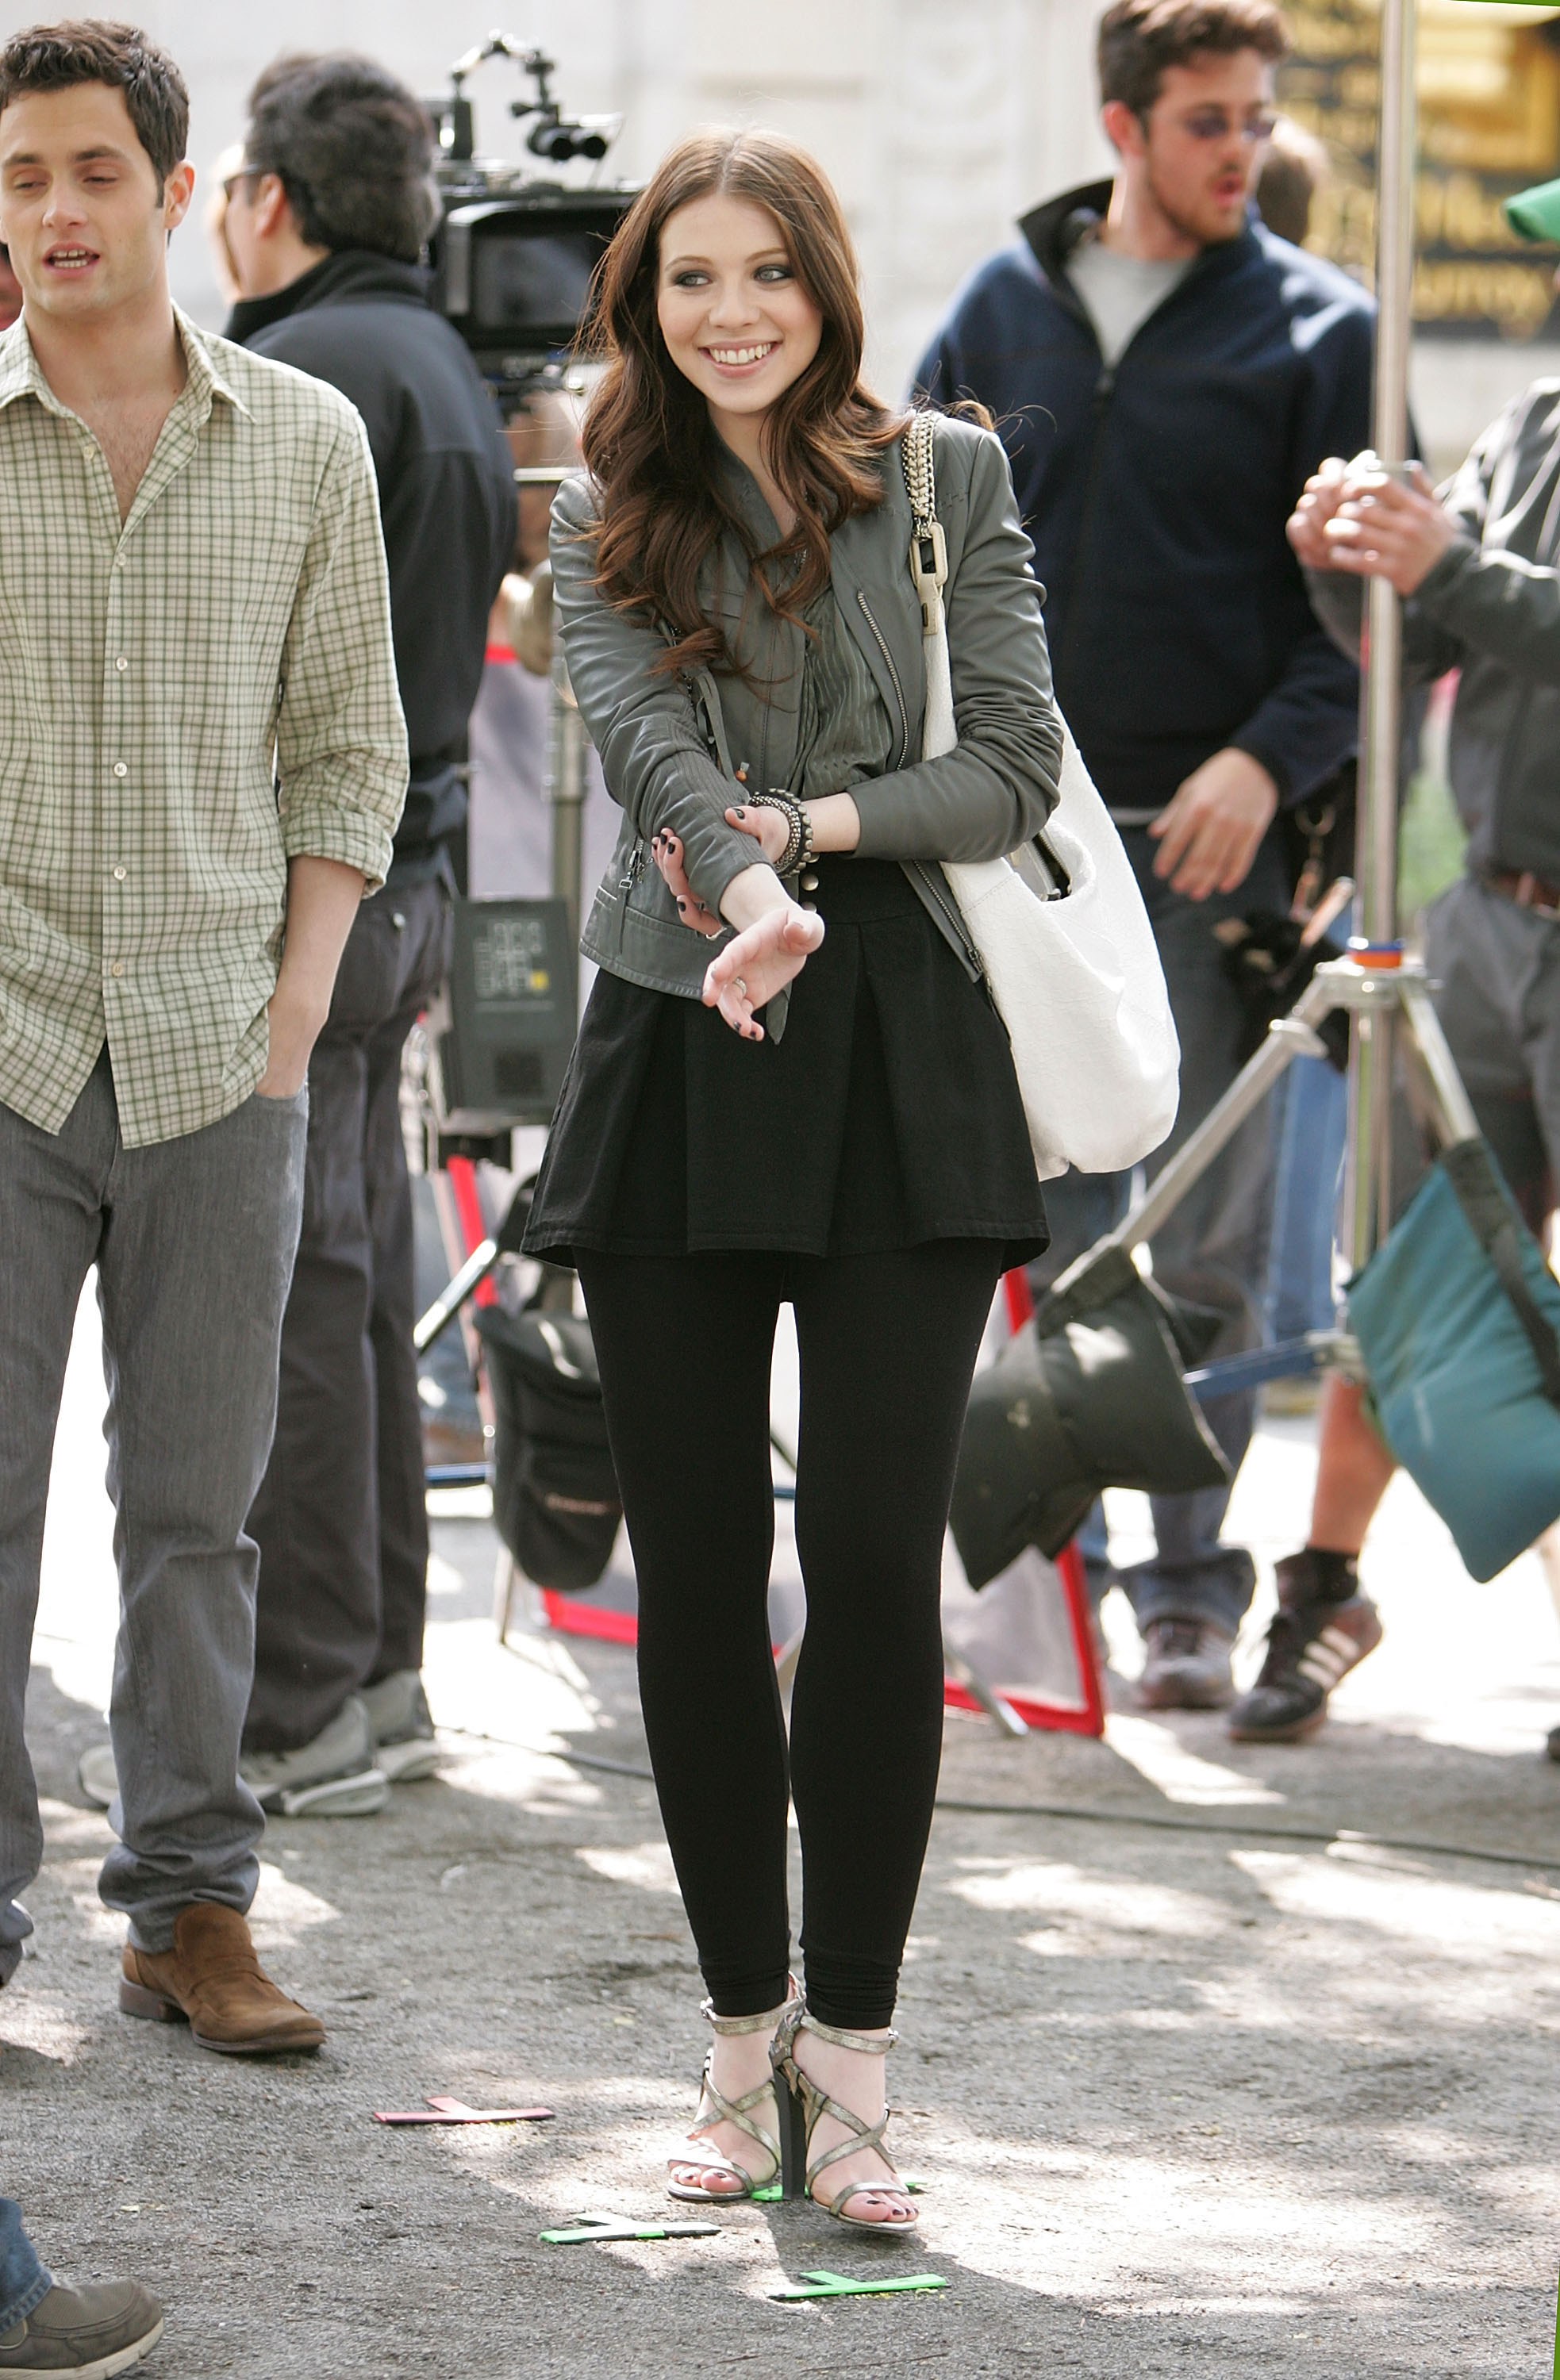 The actress gained a massive fan base as she portrayed the role of Georgina Sparks on the series Gossip Girl